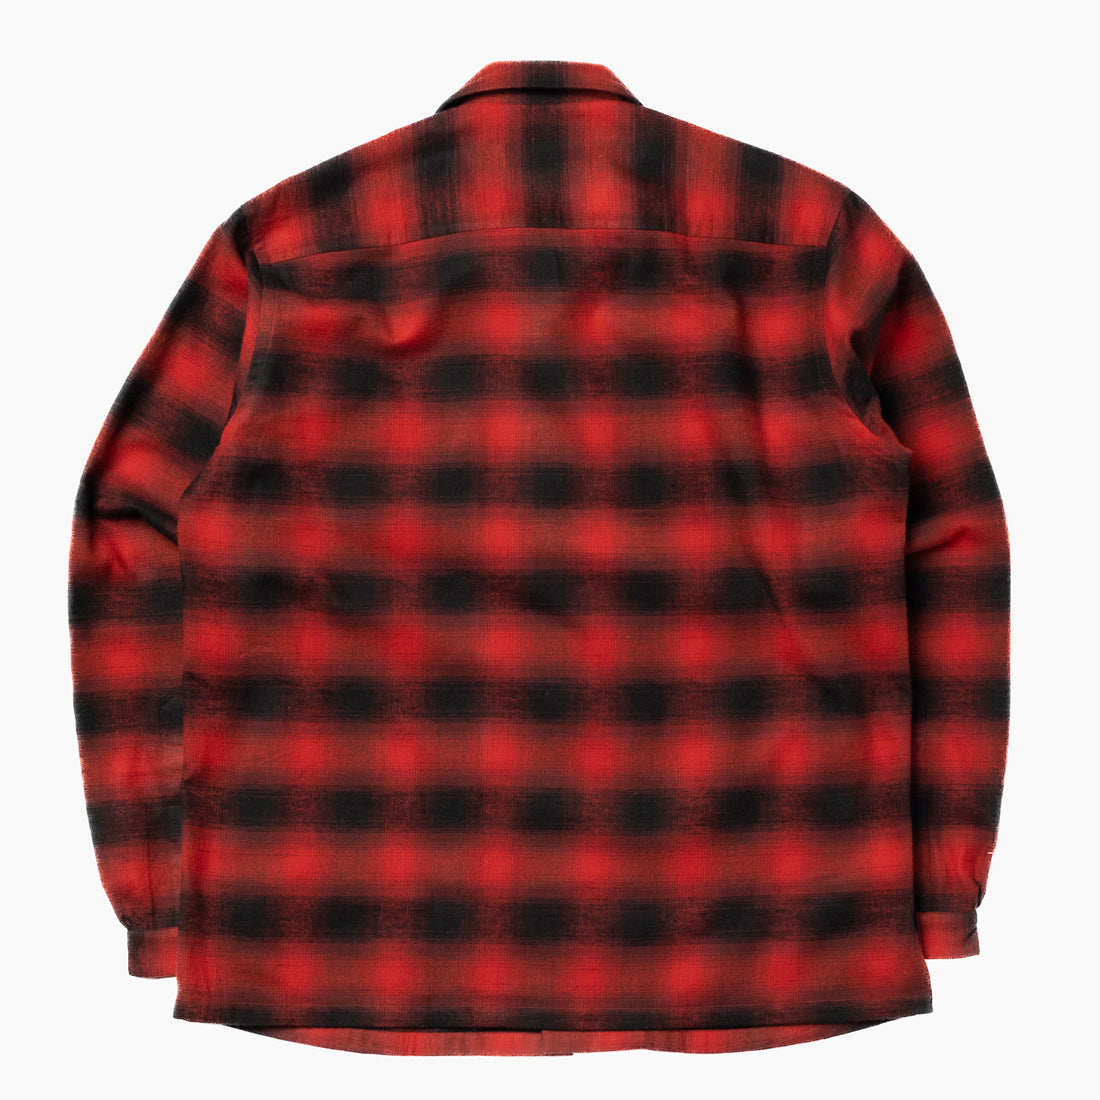 Bryceland's Brushed Cotton Sports Shirt Red Plaid